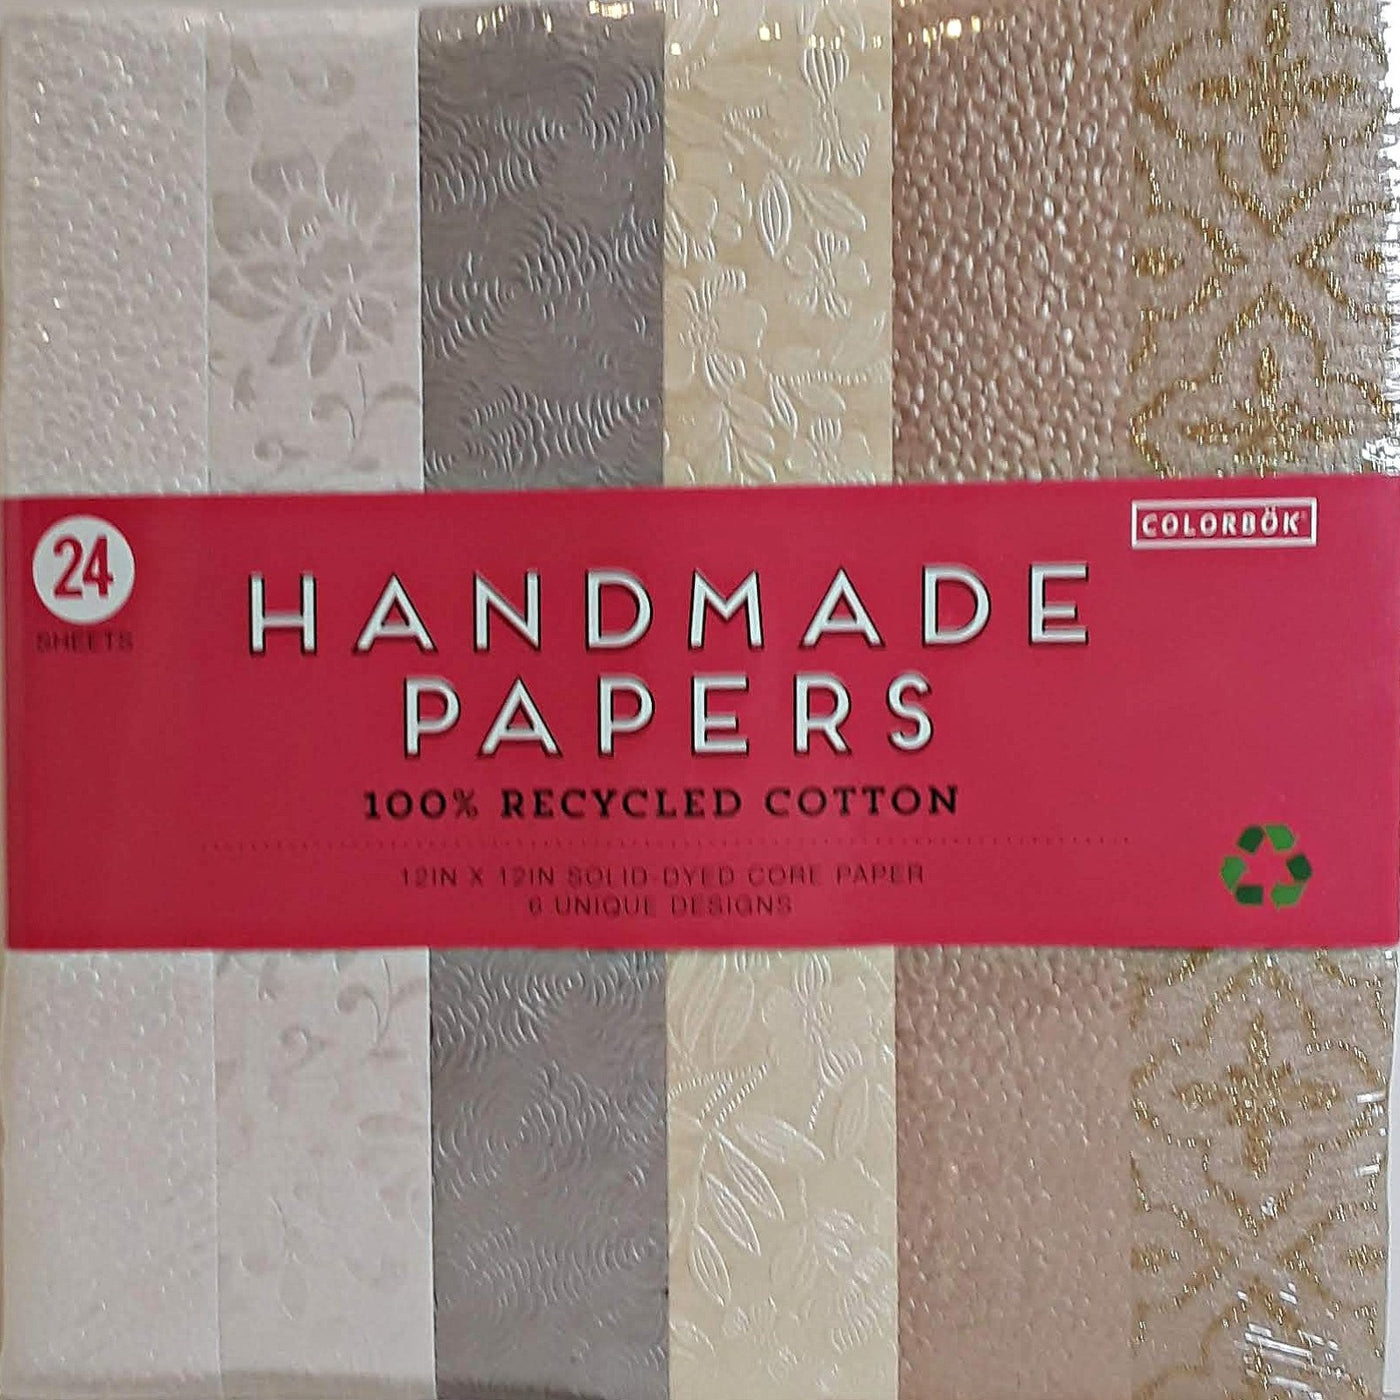 12x12 handmade paper in neutral colors with embosses designs and glitter highlights - by ColorBok